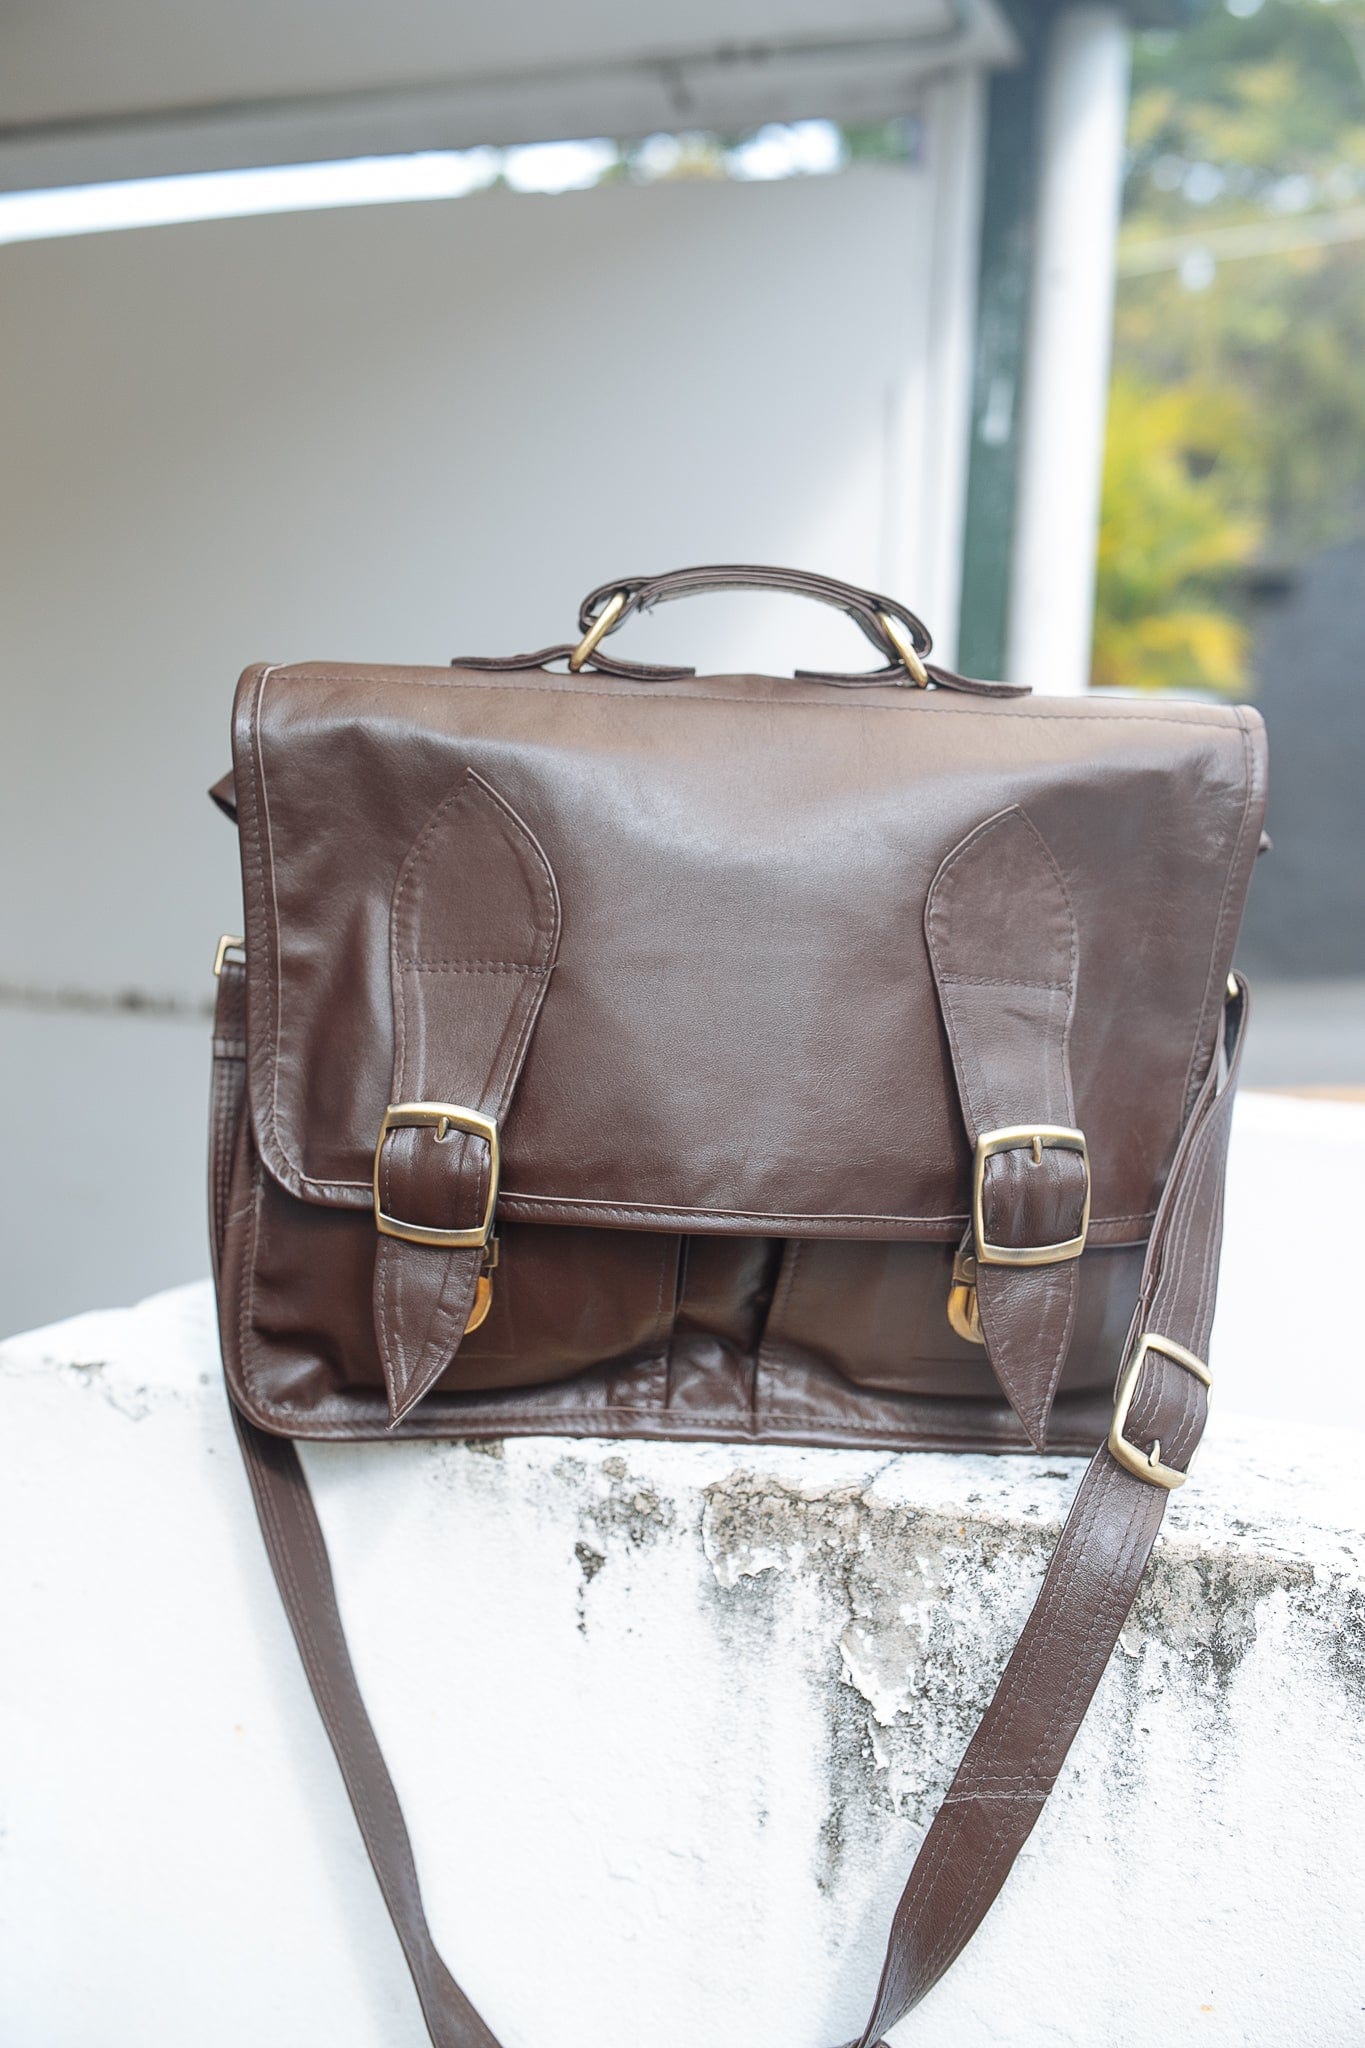 The Real McCaul Briefcases Briefcase (2 Partition) Australian Made Australian Owned Kangaroo Leather Briefcase Shoulder Bag Satchel Made in Australia